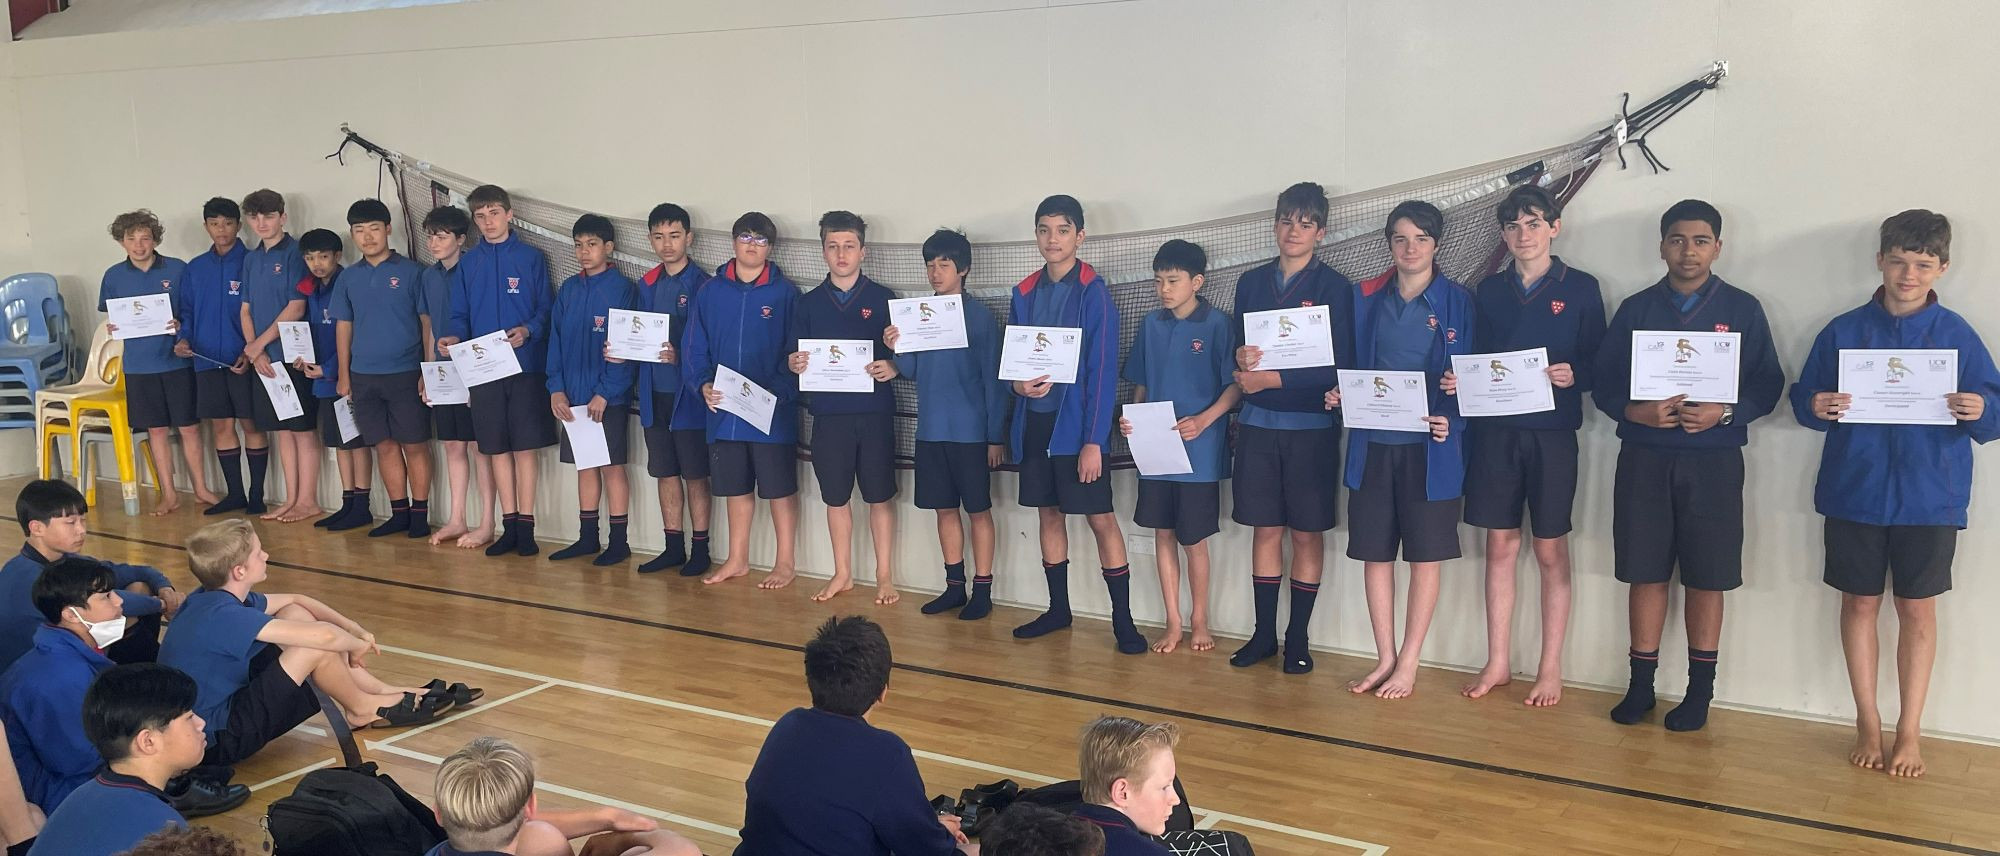 Kiwi Science Competition success